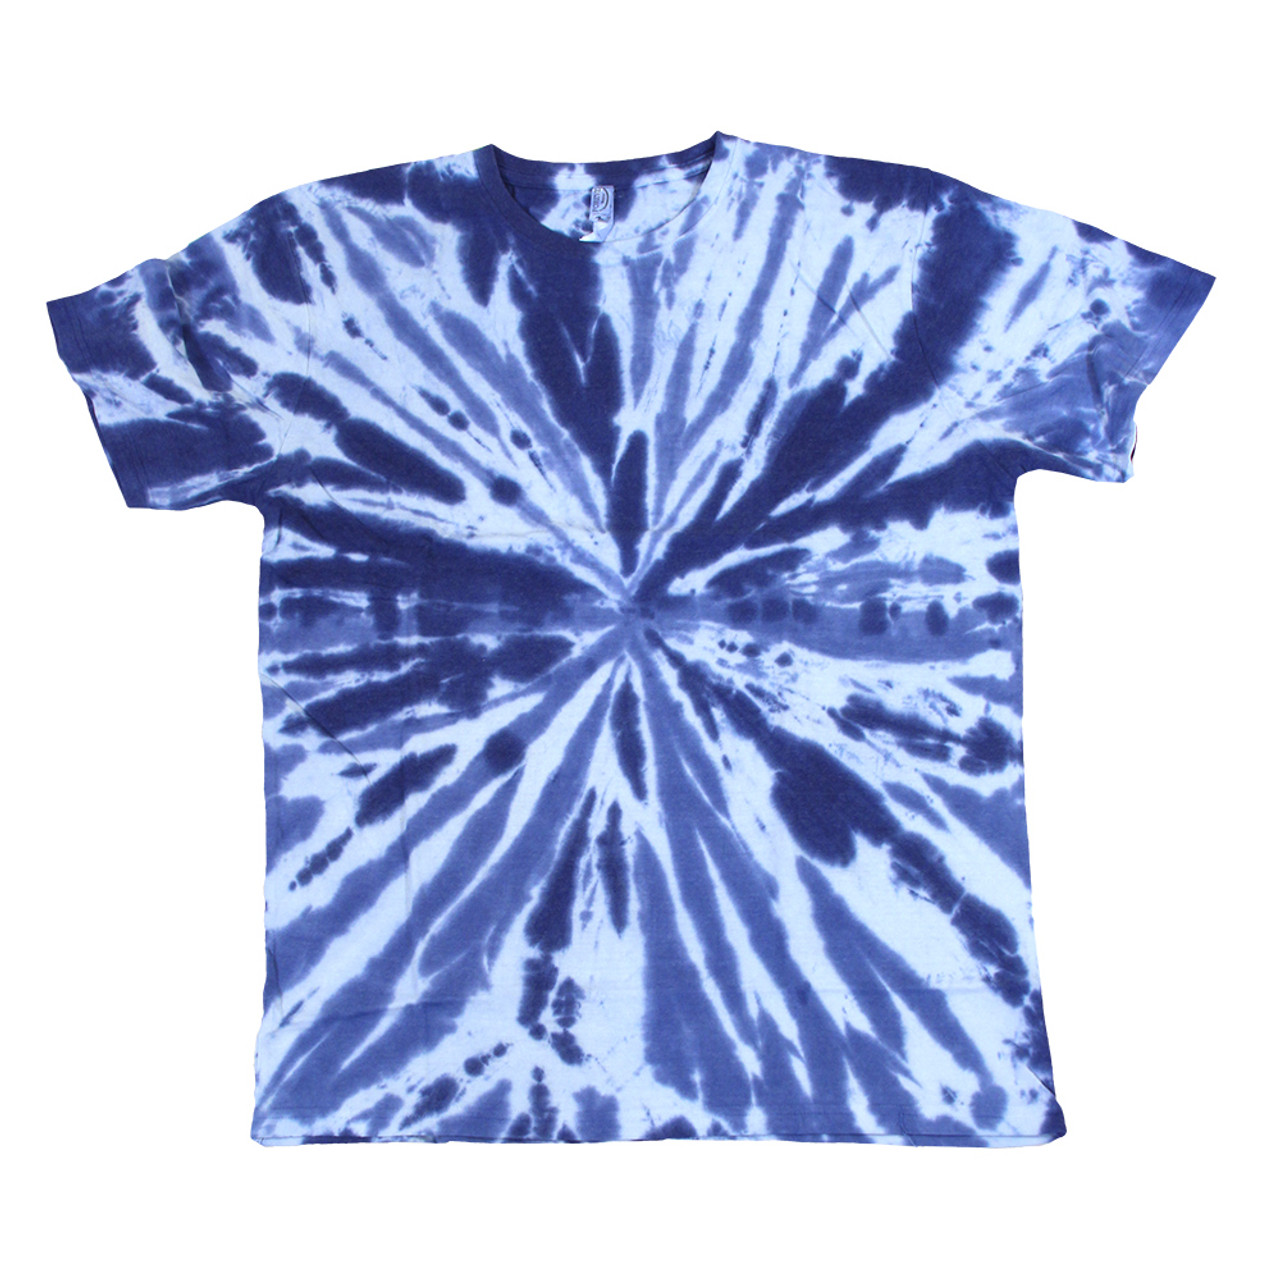 Royal Blue Tie-Dye T-Shirt - Africa Imports